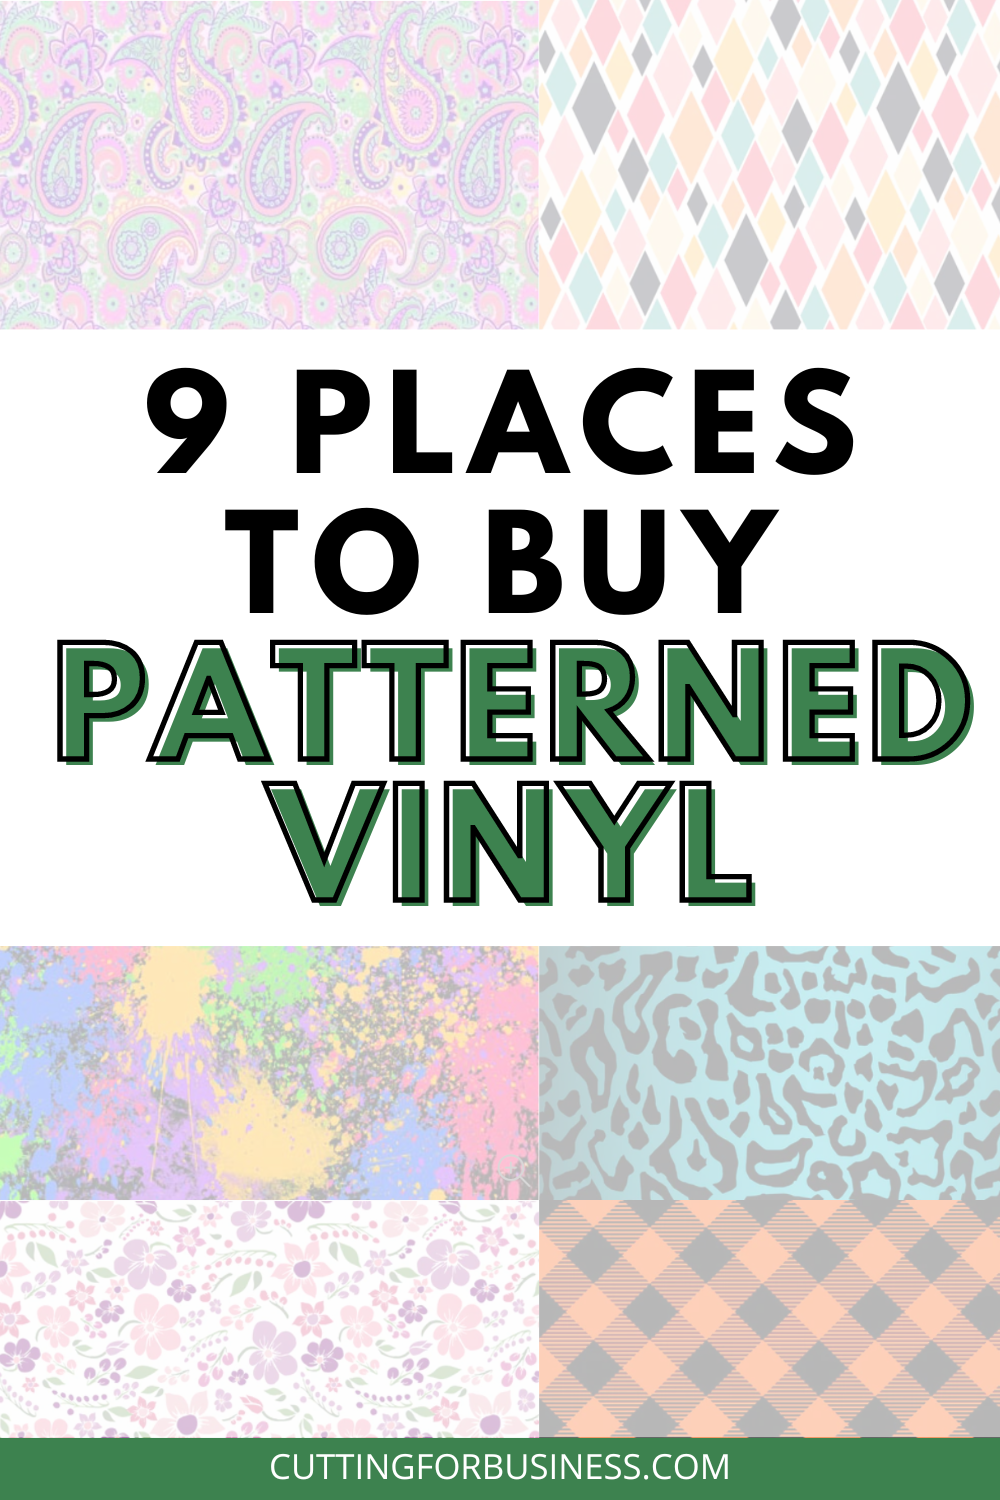 9 Places to Buy Patterned Vinyl - cuttingforbusiness.com.